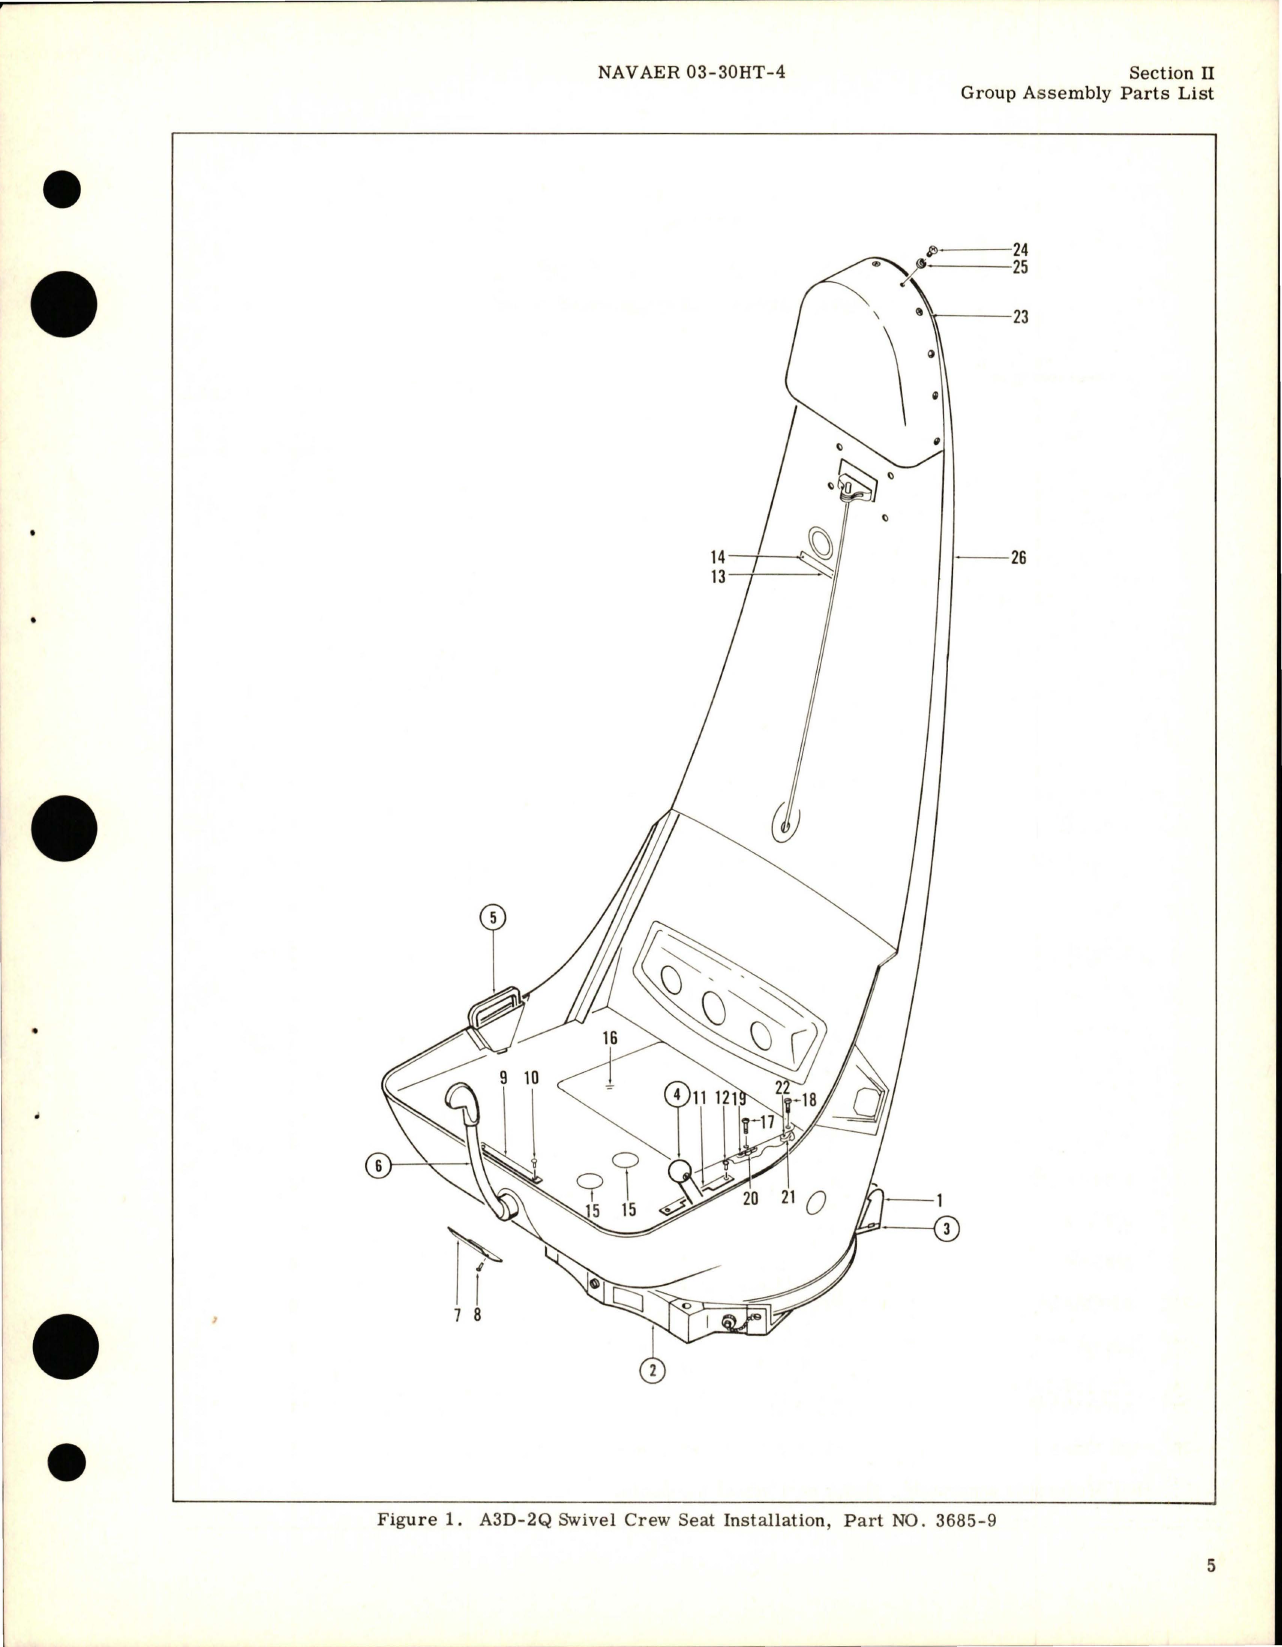 Sample page 7 from AirCorps Library document: Illustrated Parts Breakdown for Swivel Crew Seat - A3D-2Q - Part 3685-9 